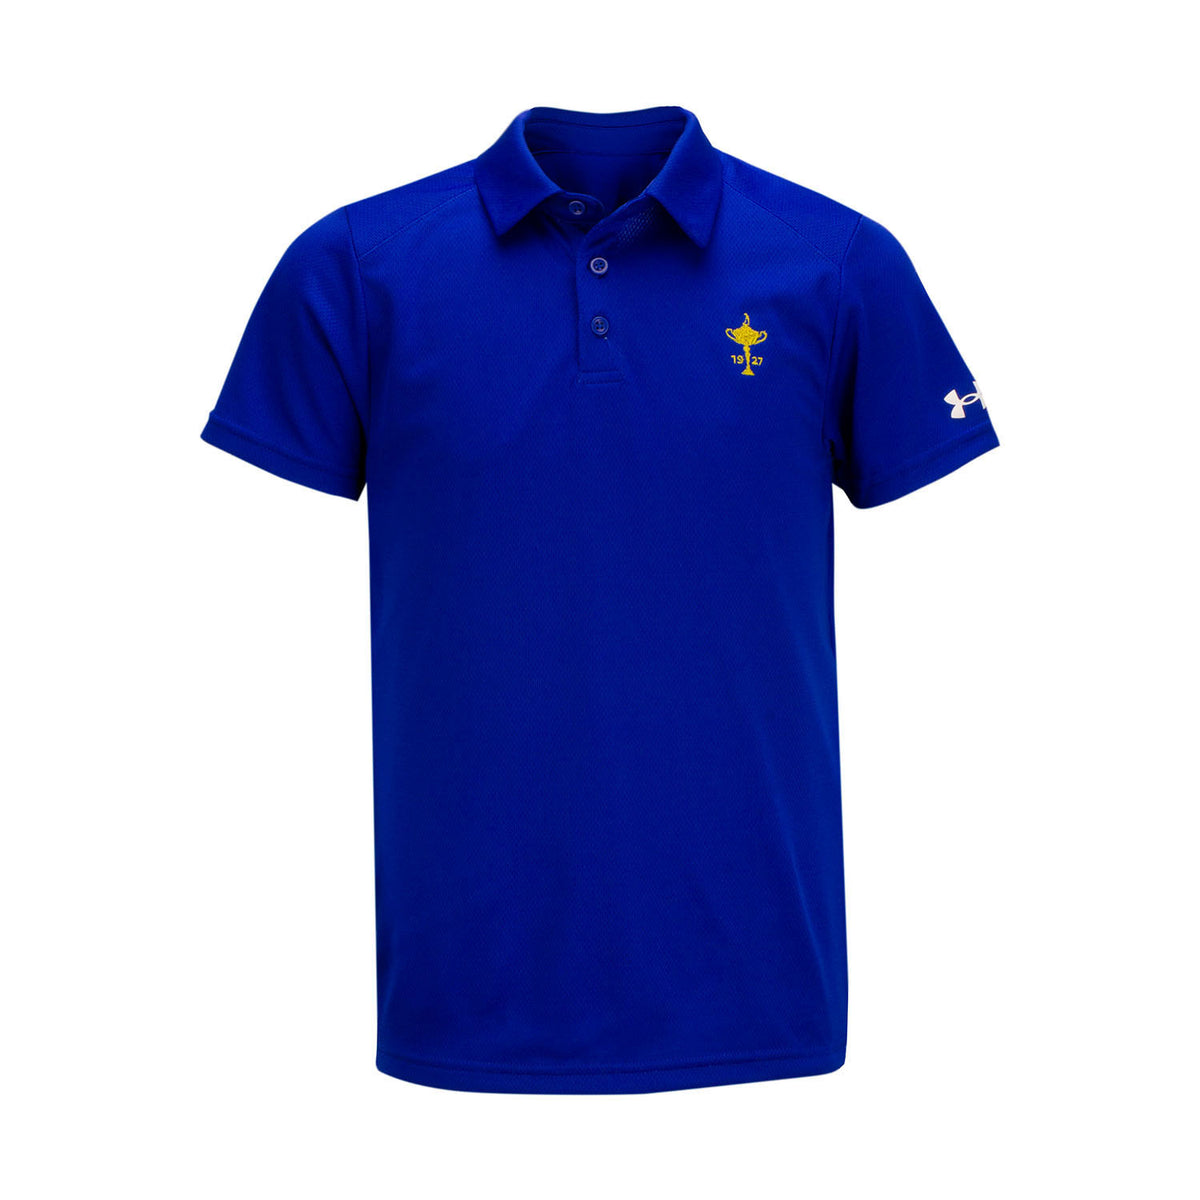 Ryder Cup Boys Youth Tech Mesh Polo in Blue- Front View